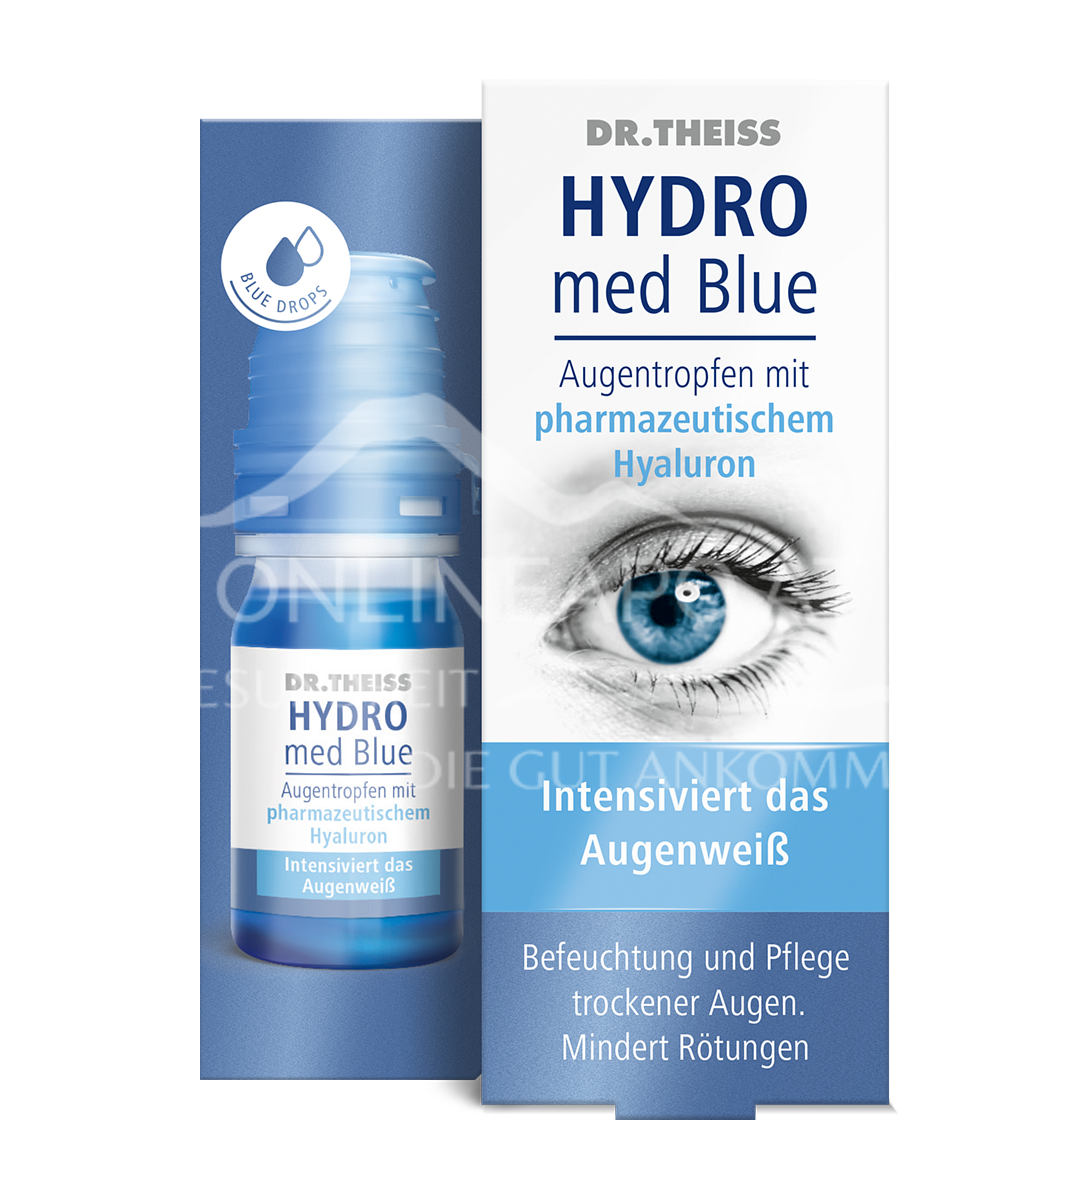 DR. THEISS HYDRO med Blue Augentropfen Multidose